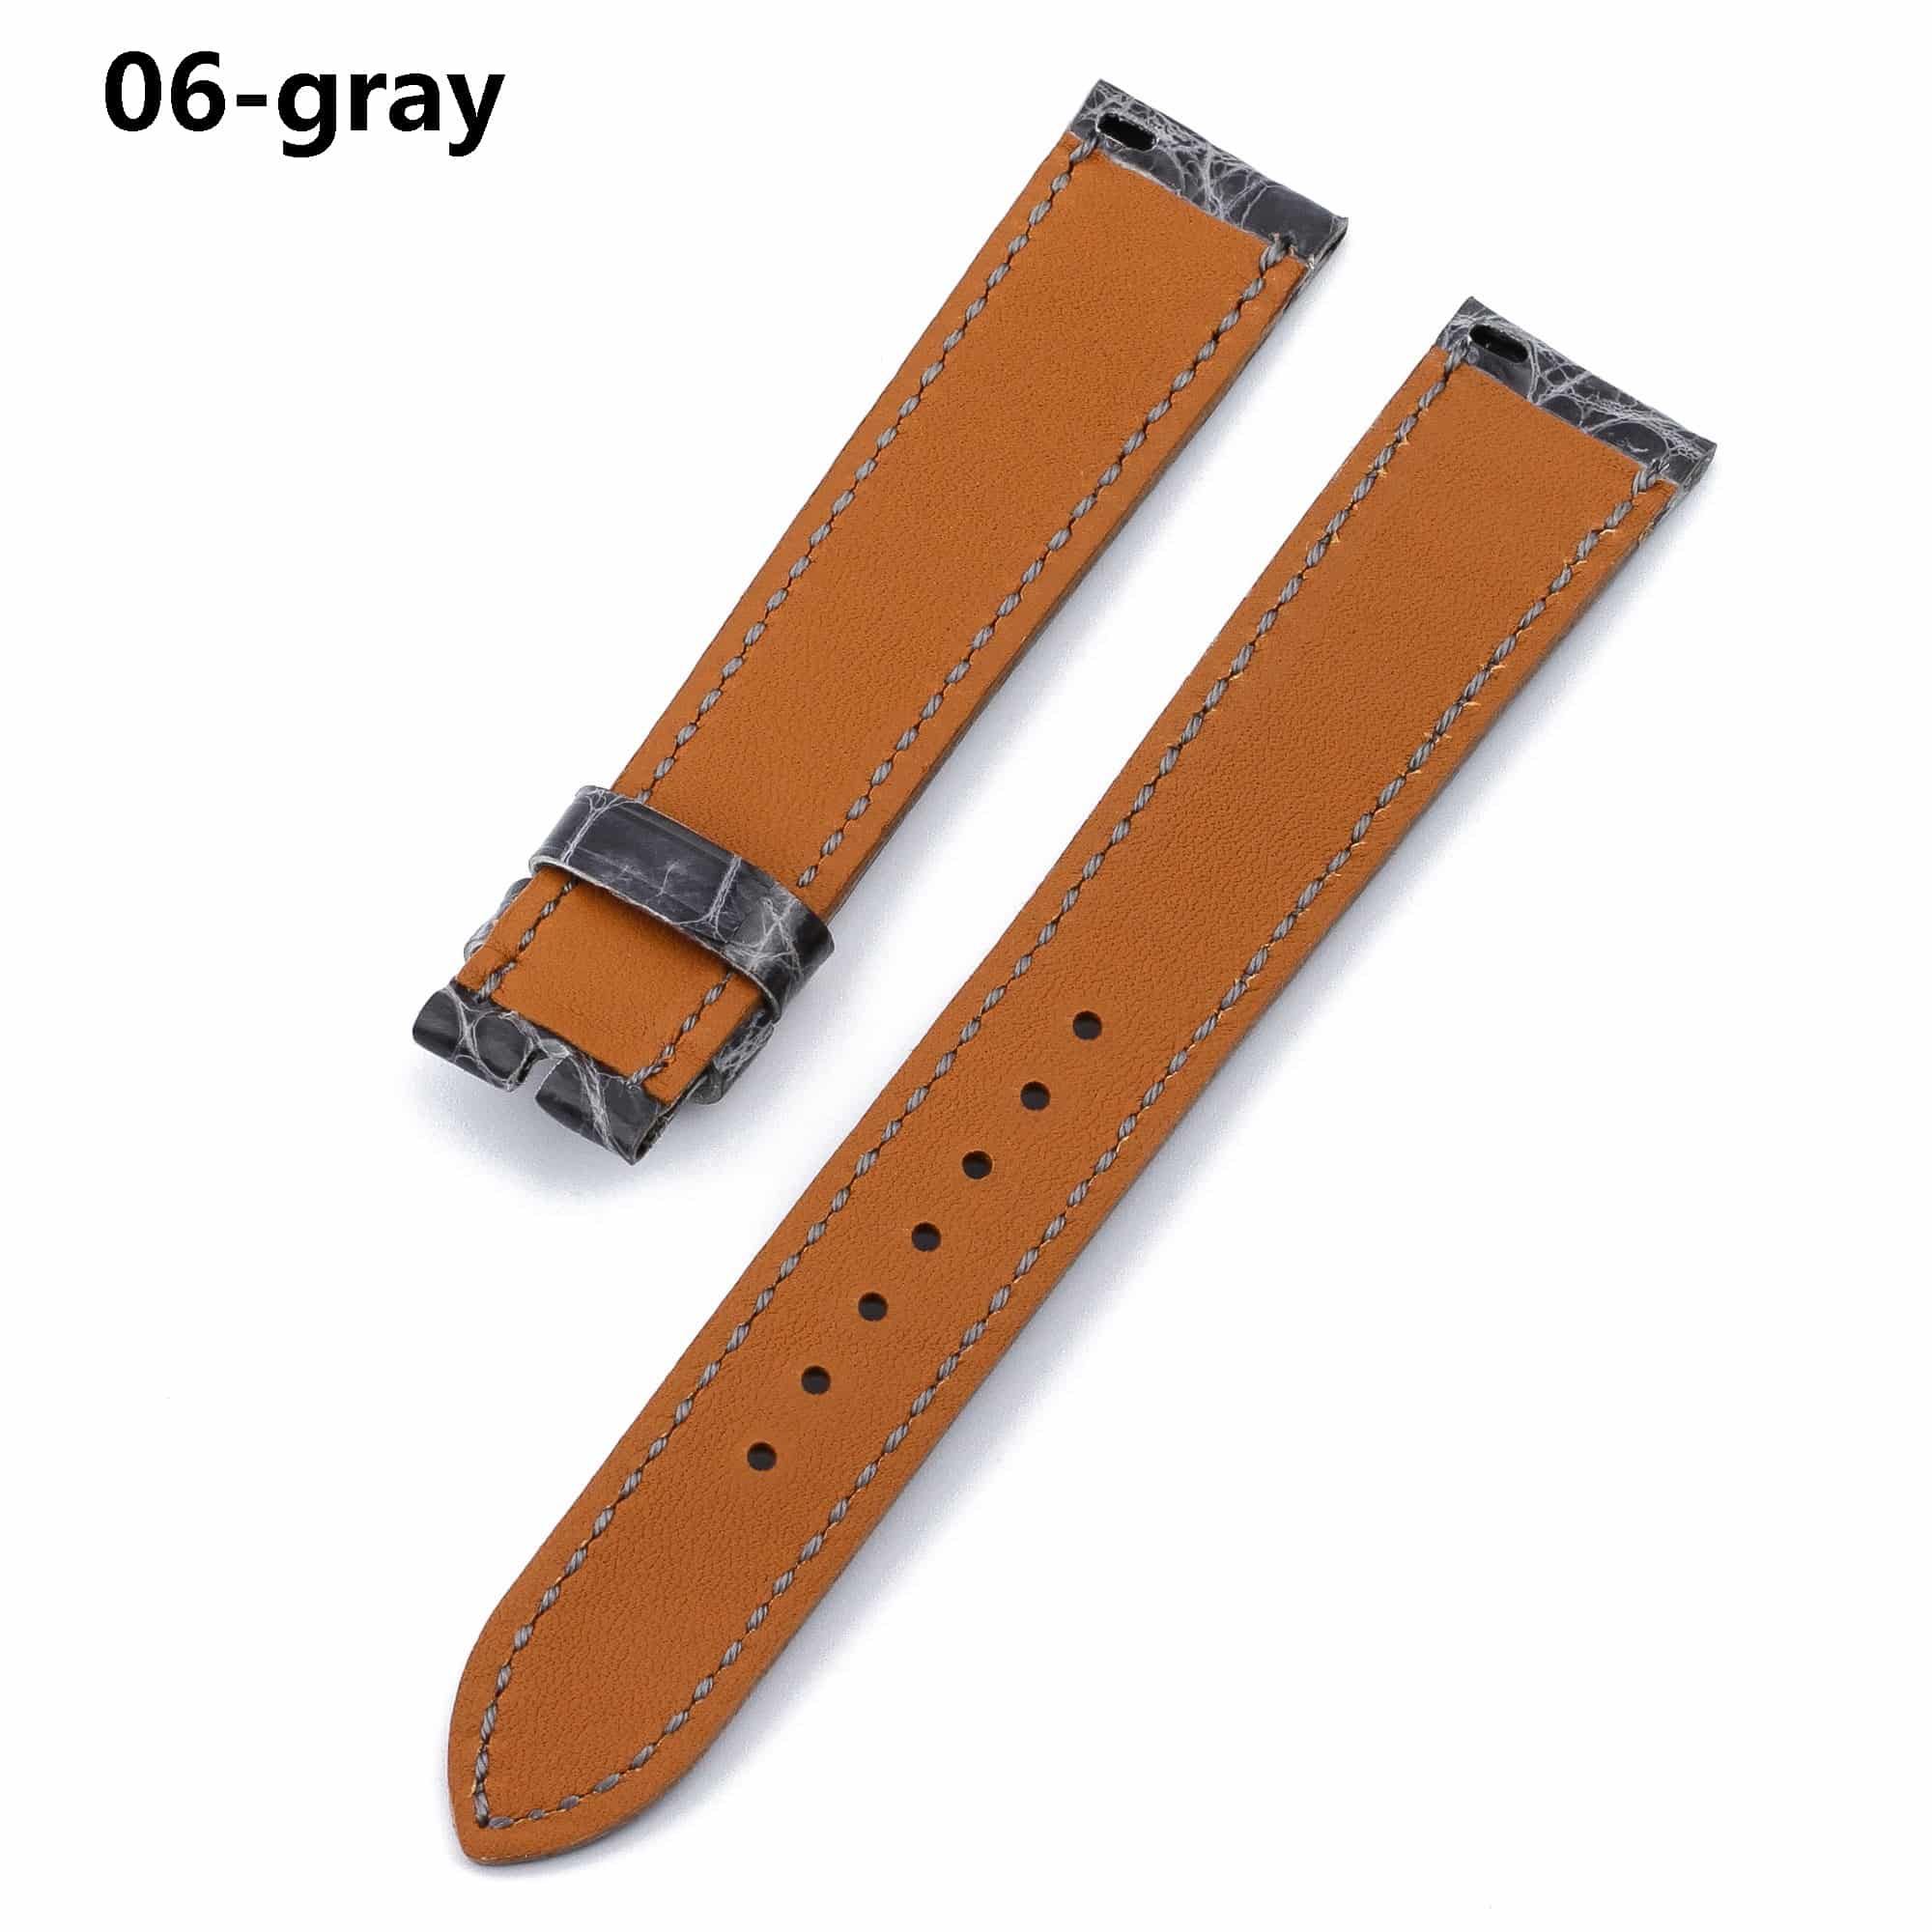 Alligator Hermes leather strap replacement Cape cod single tour gray watch band